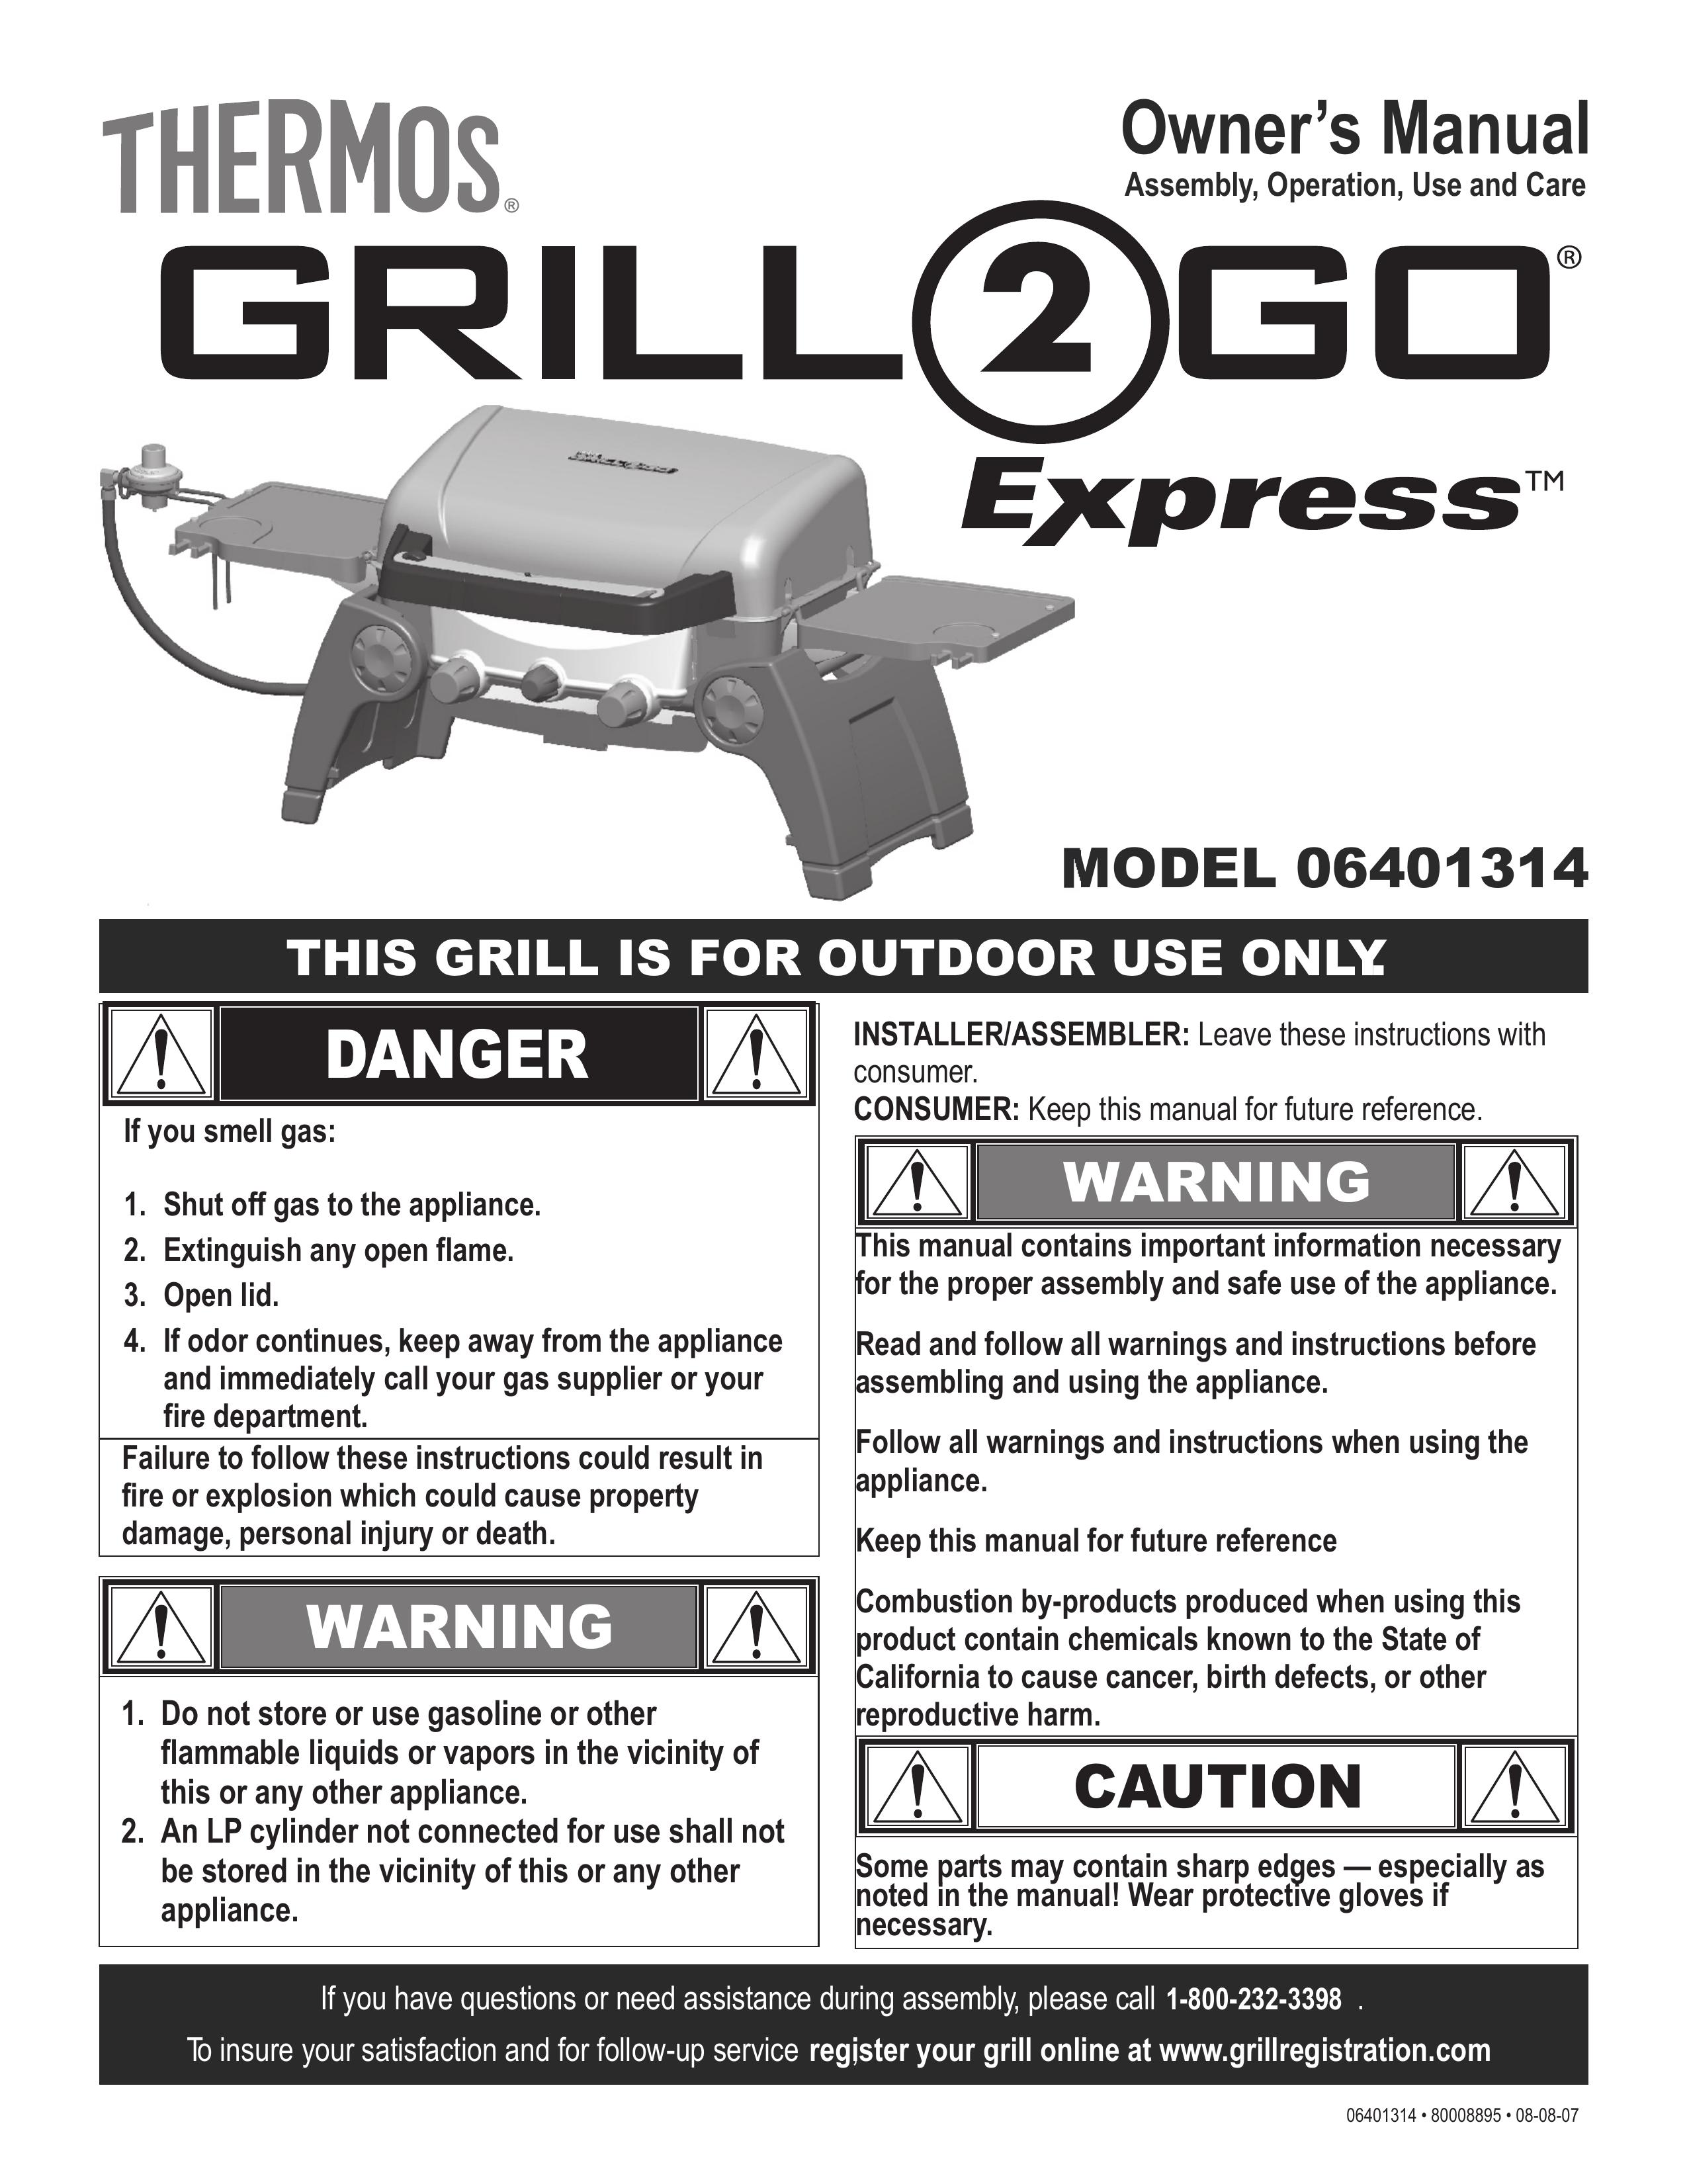 Thermos 06401314 Electric Grill User Manual